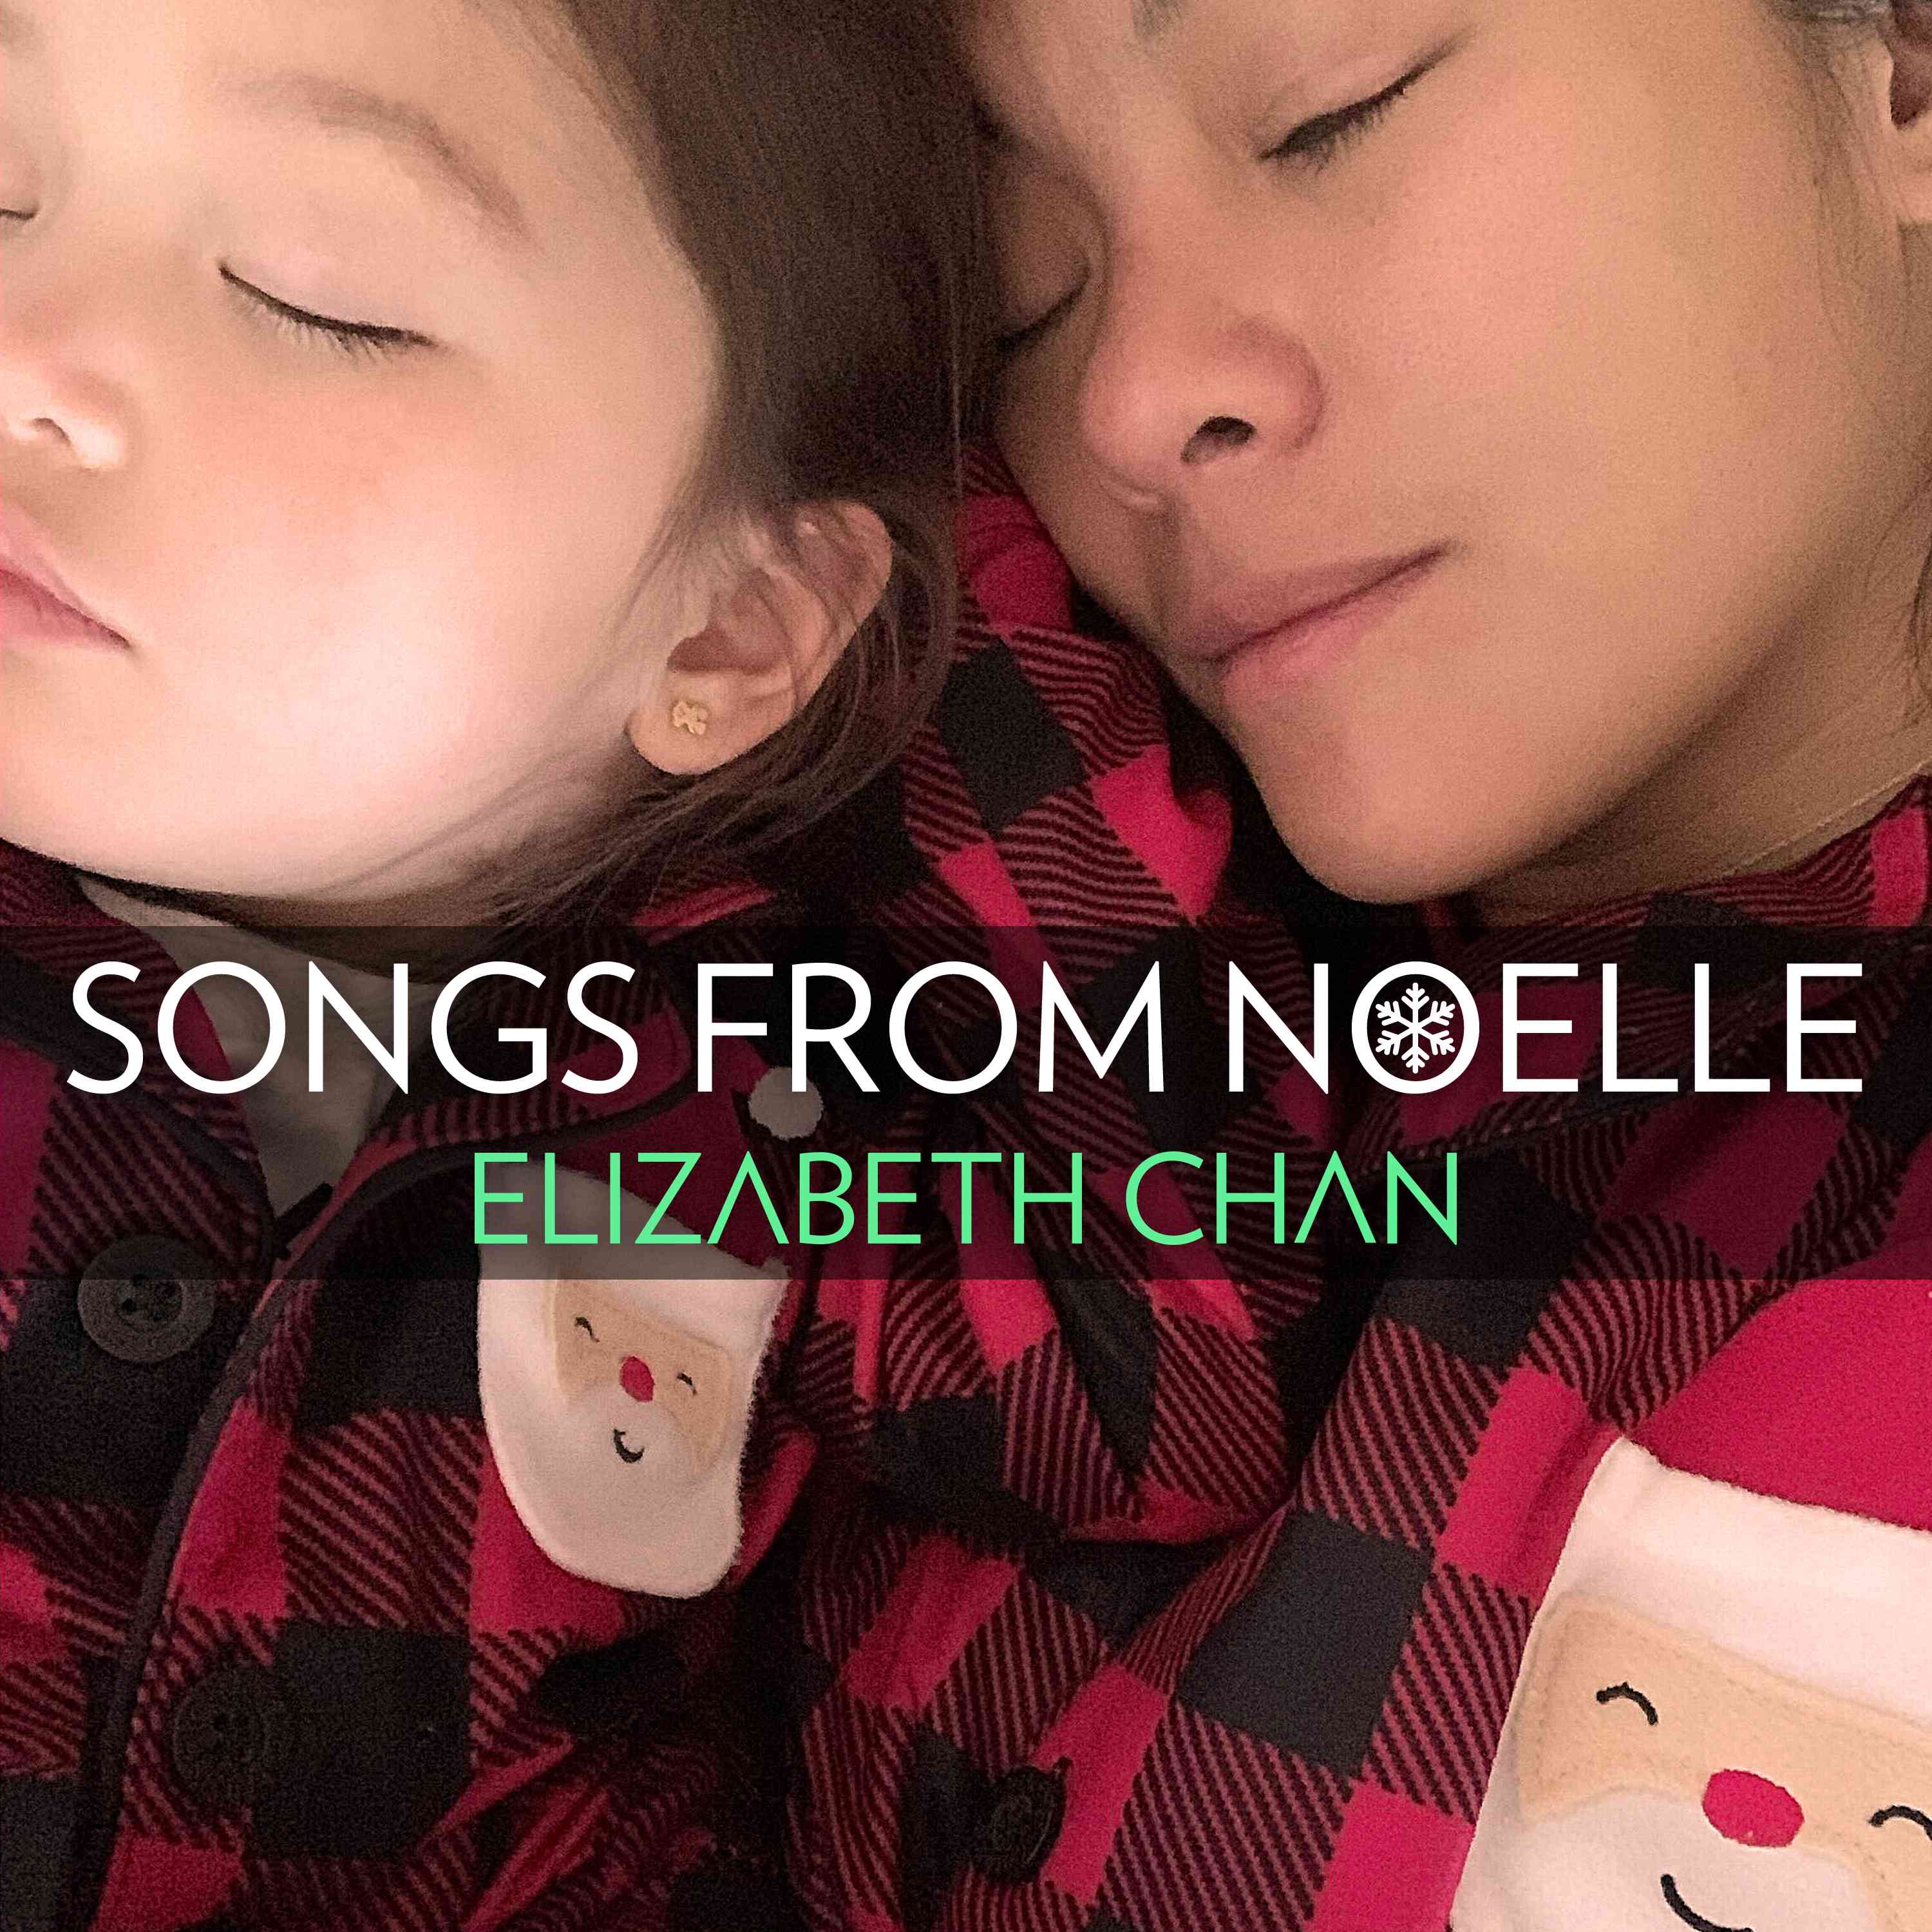 Holiday Christmas Albums Elizabeth chan songs from noelle